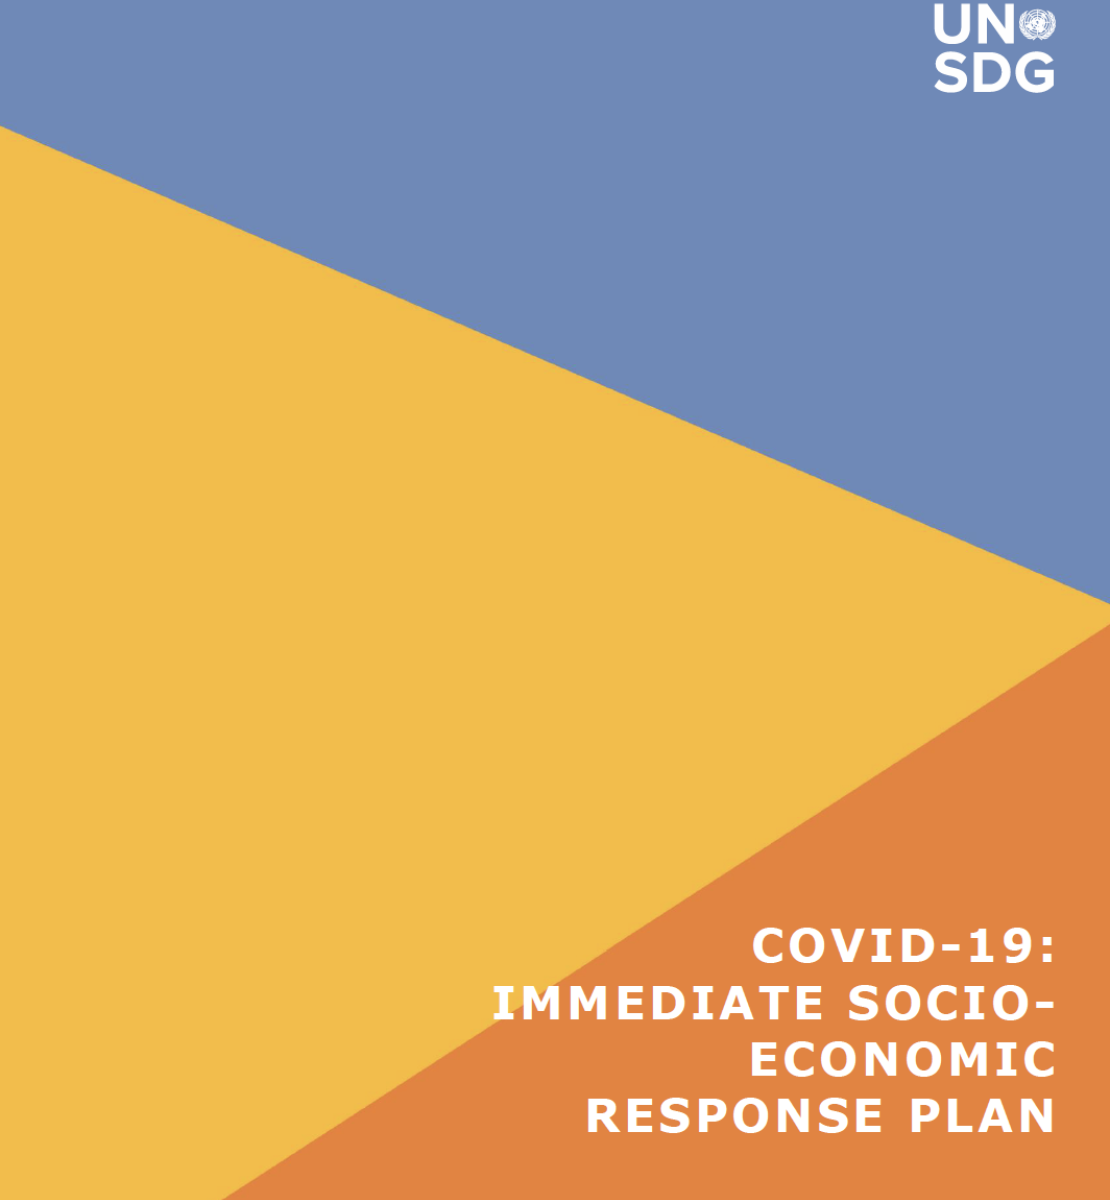 Cover shows the title, "COVID-19: Immediate Socio-Economic Response Plan for India" on the bottom left against a colourful background.